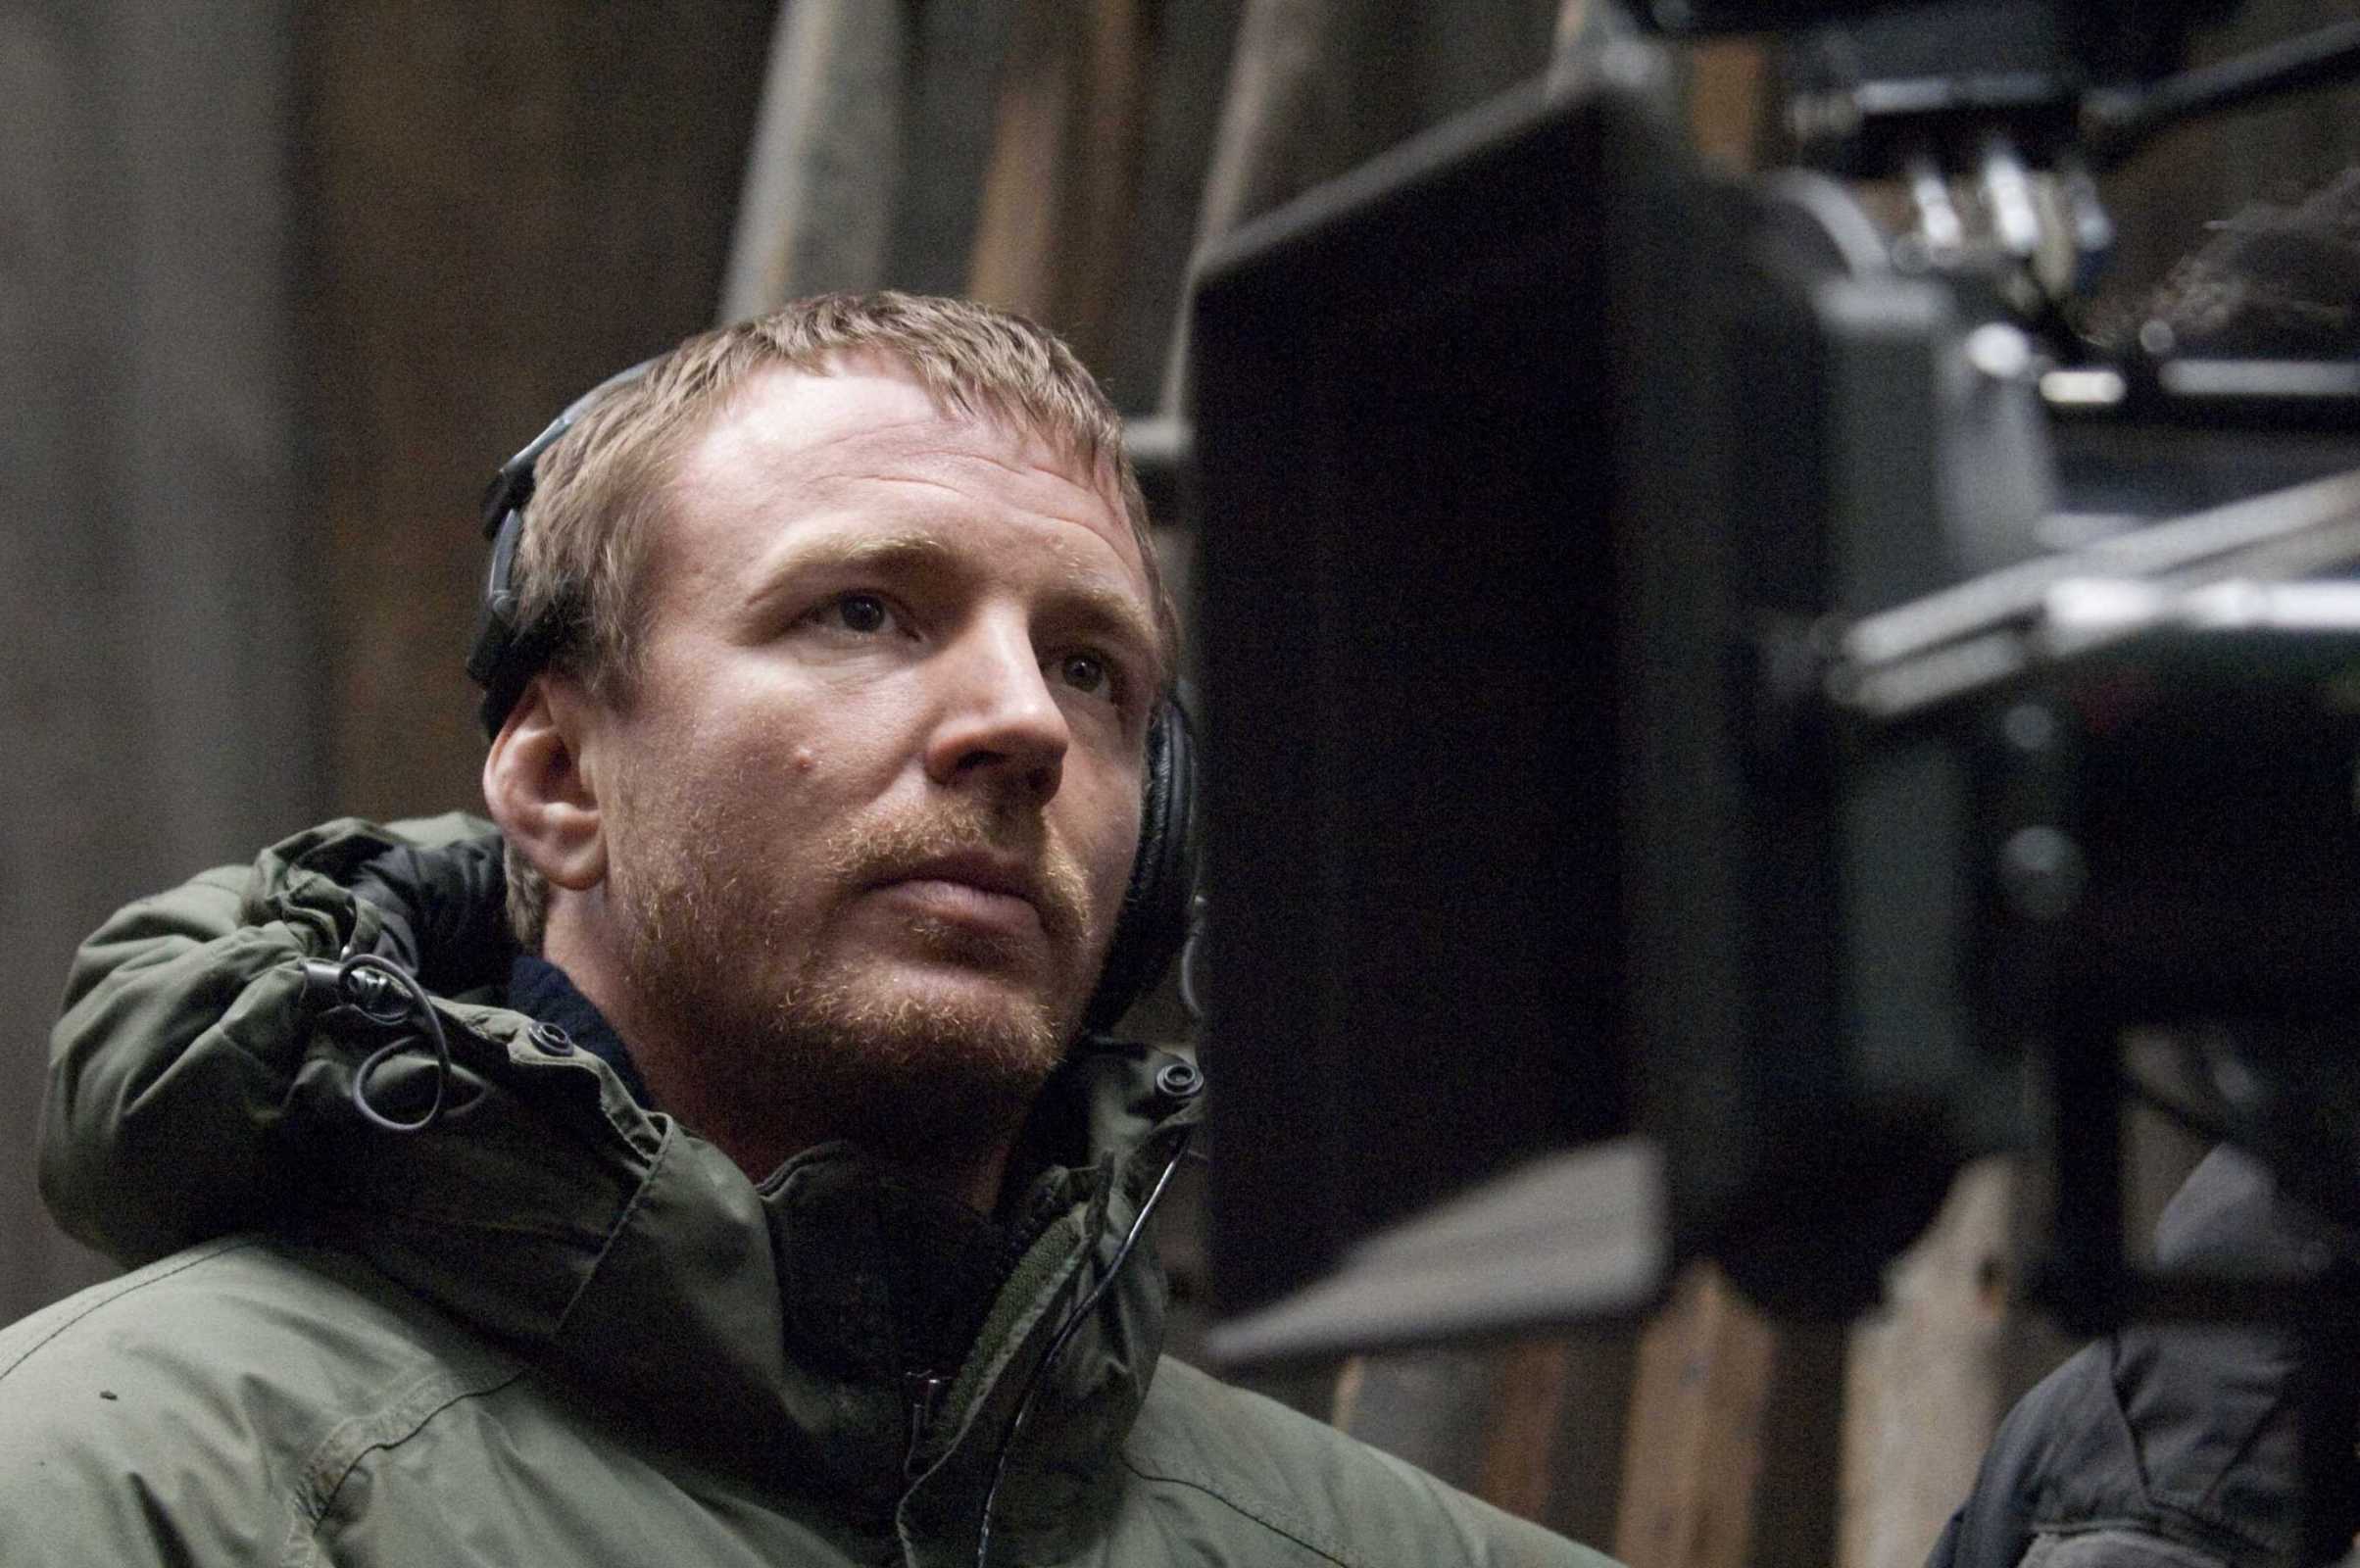 http://thefilmstage.com/wp-content/uploads/2011/12/guy-ritchie-01.jpg